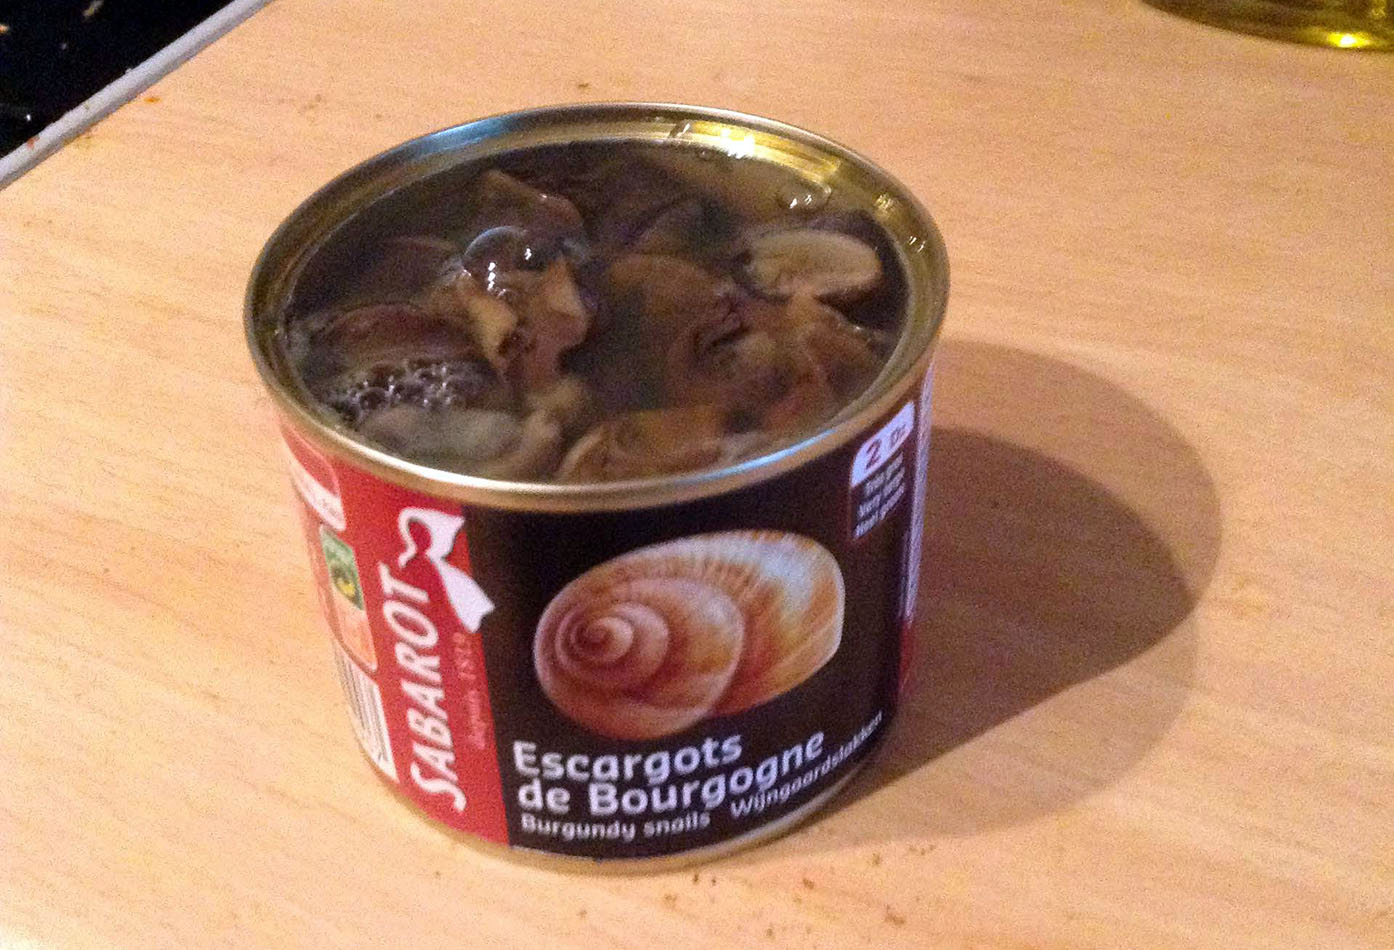 Snails in a can